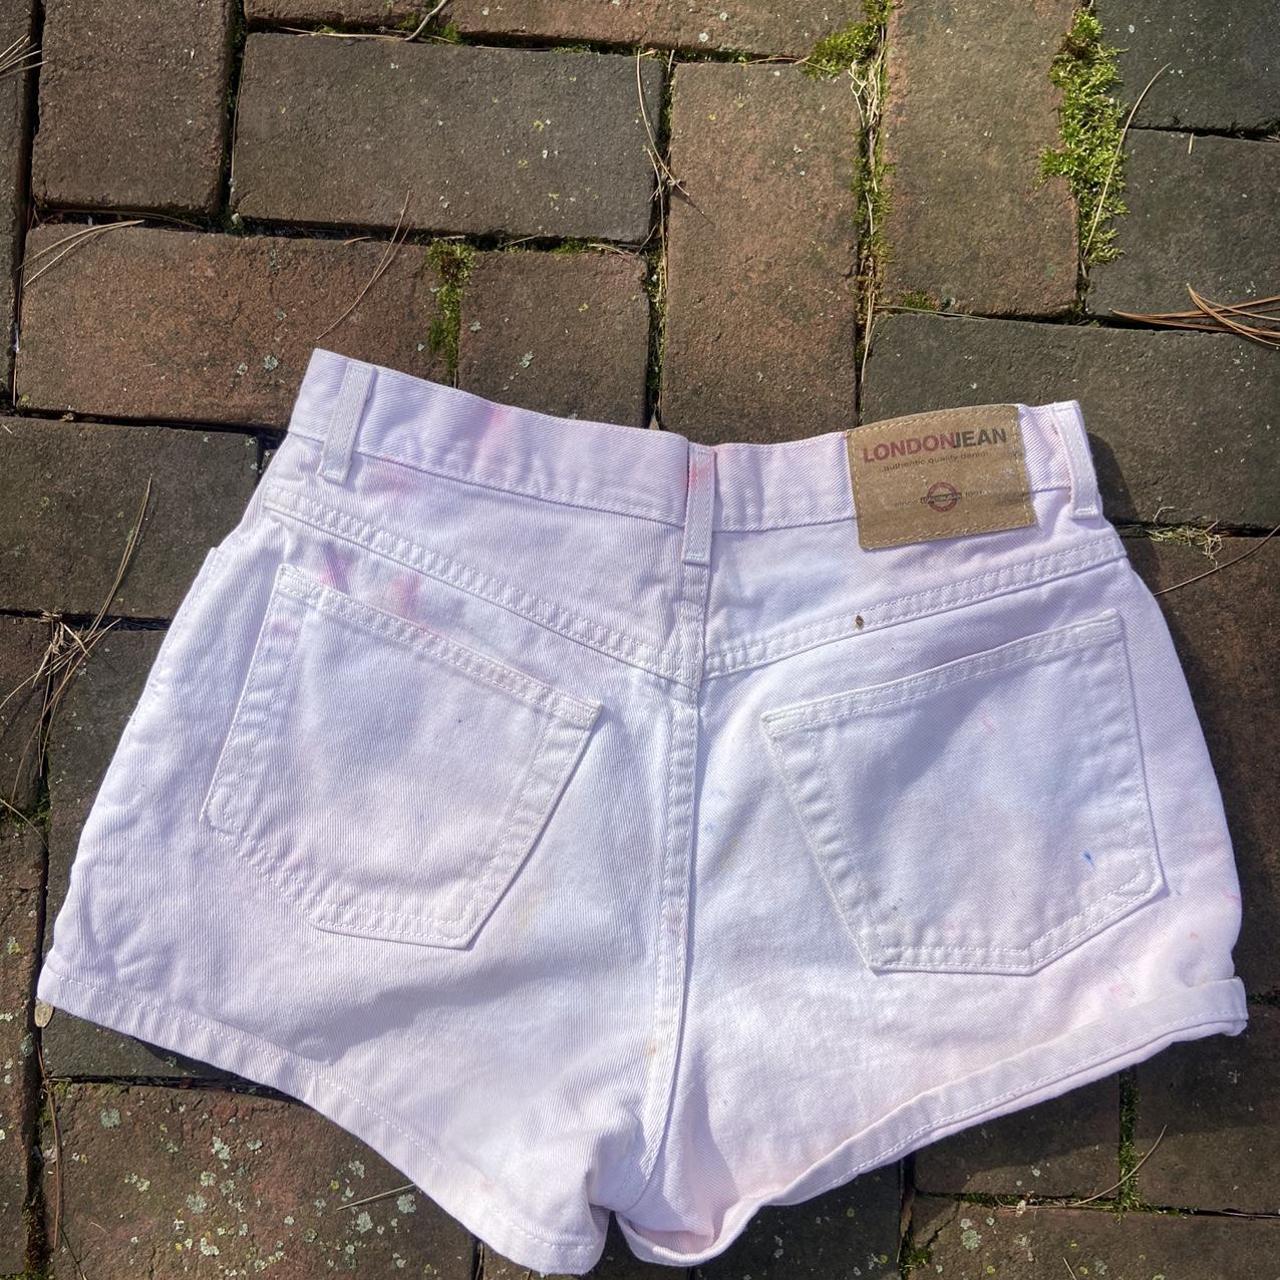 17London Women's White and Pink Shorts (3)